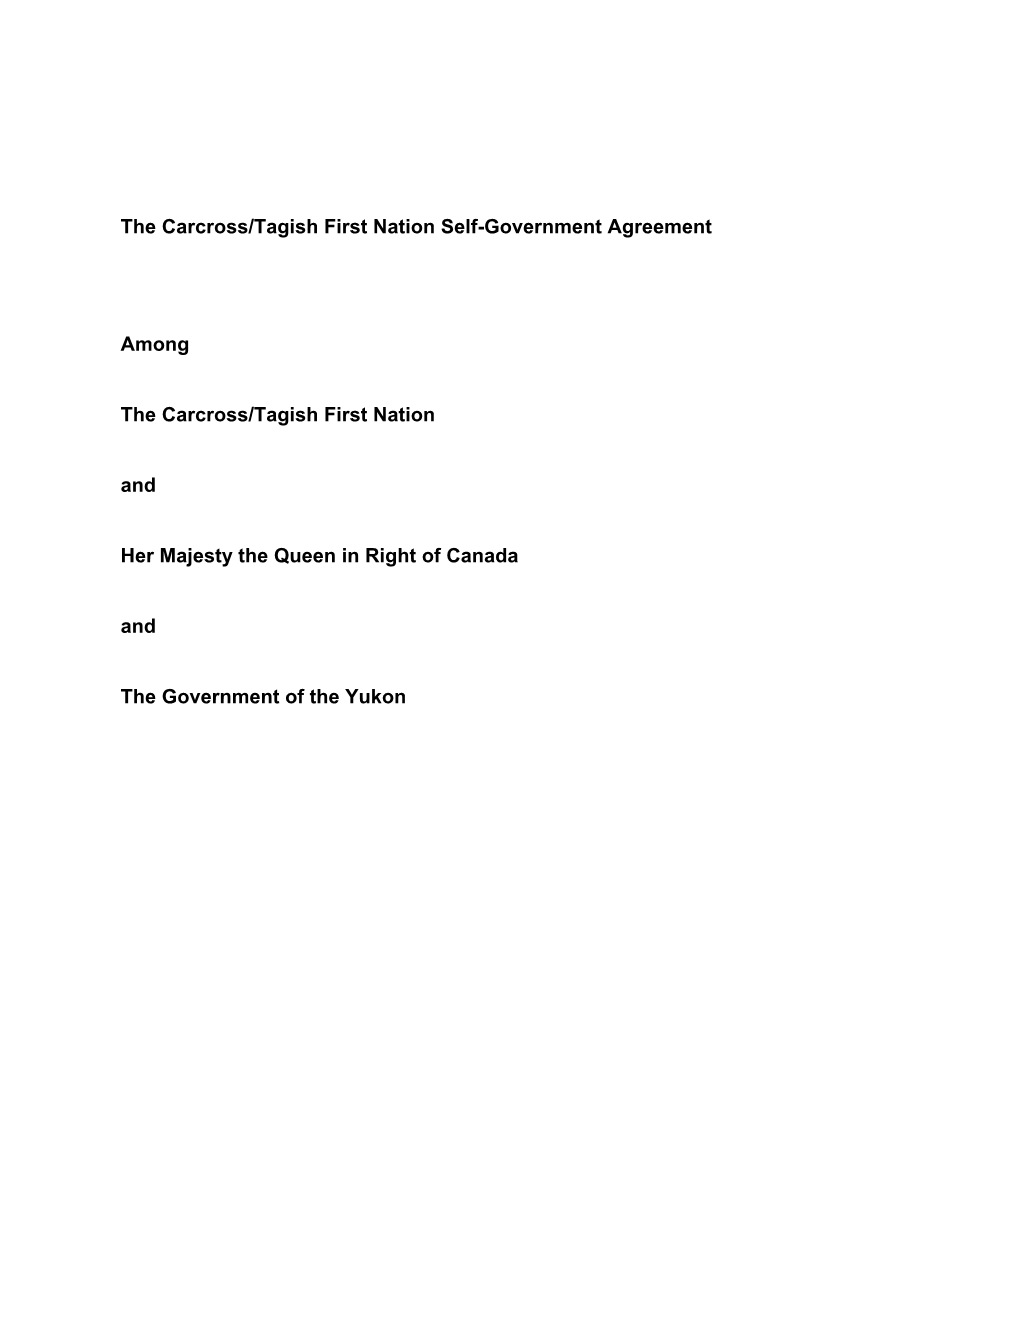 The Carcross/Tagish First Nation Self-Government Agreement